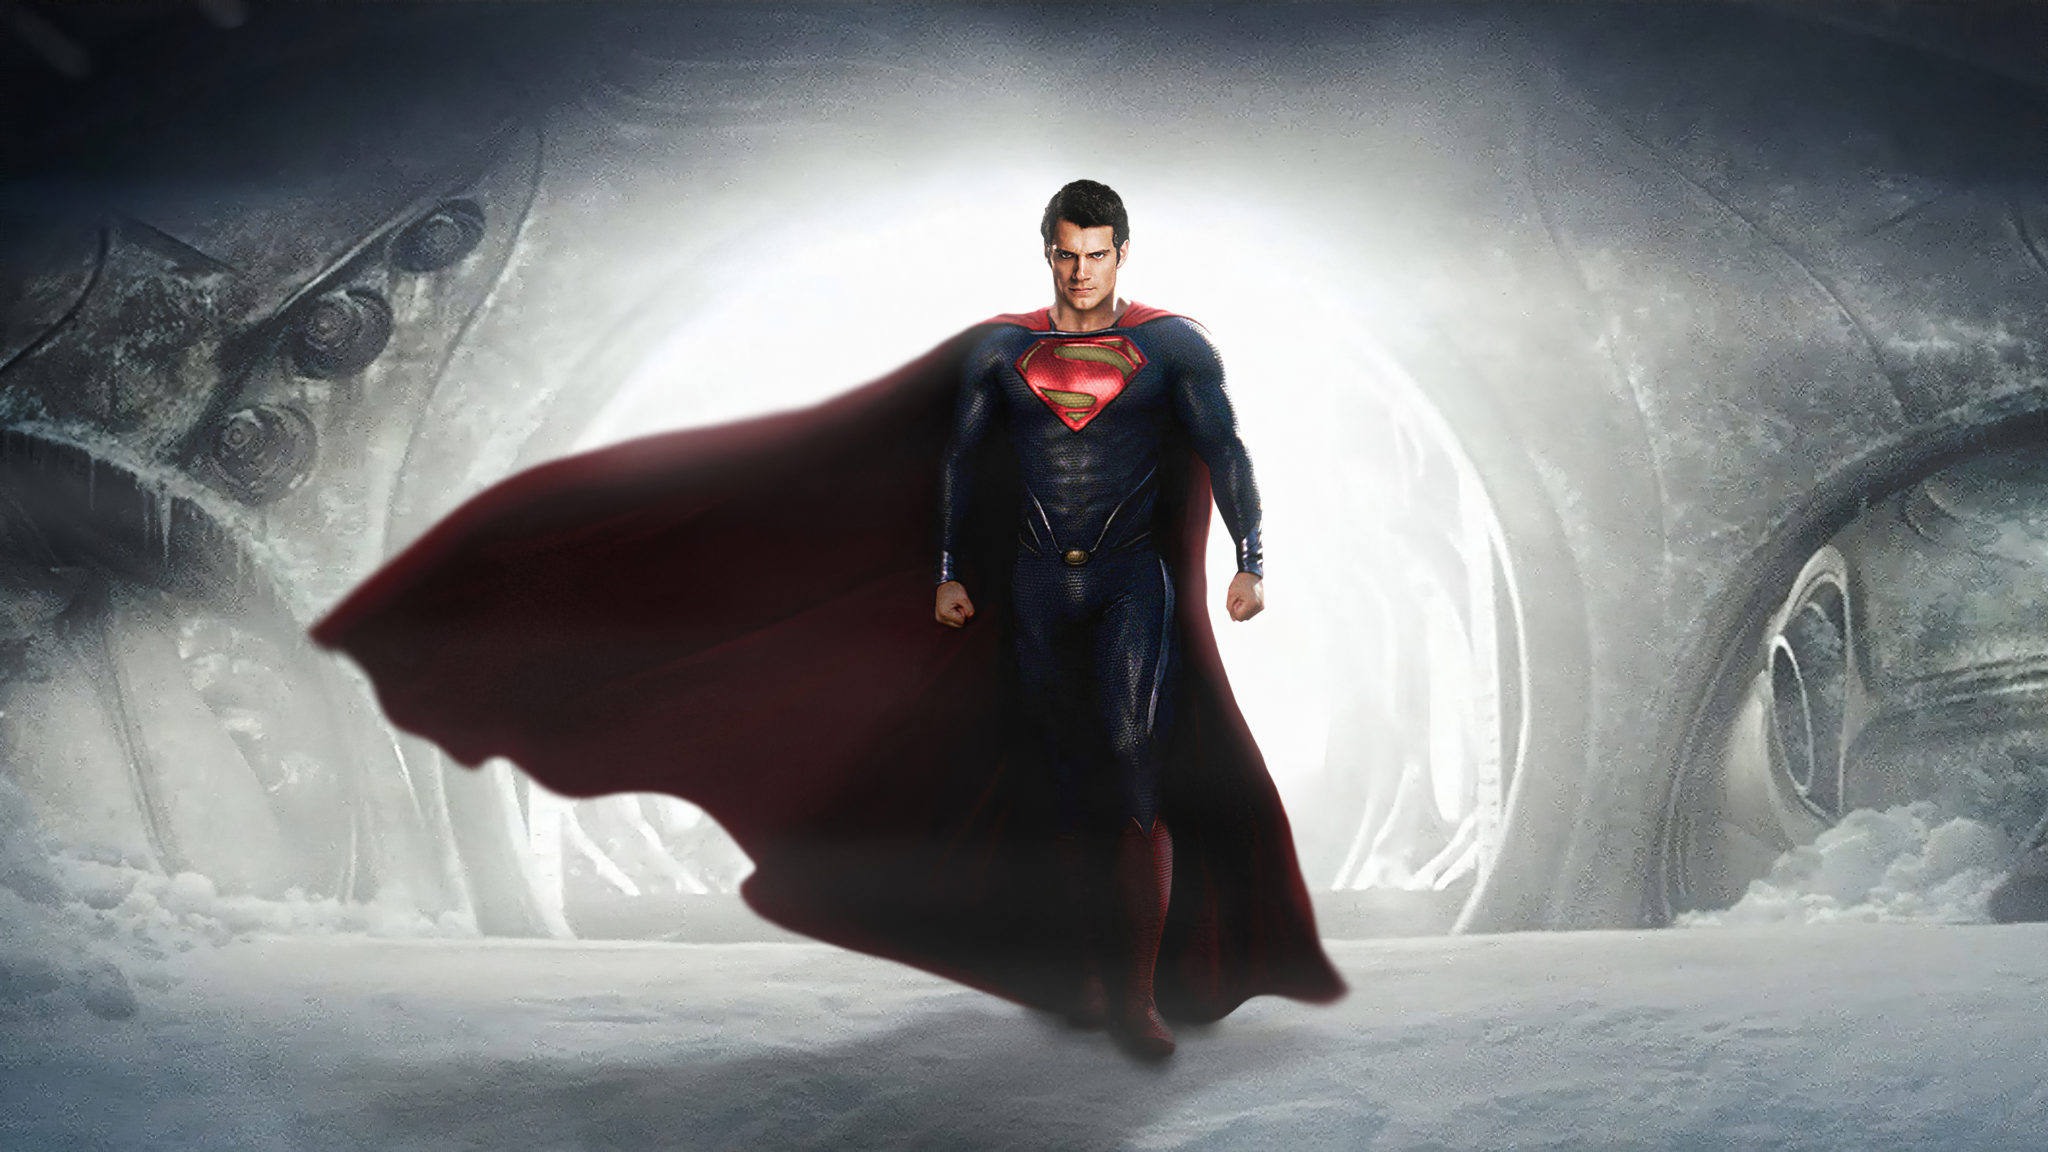 Best 4K Superman Wallpaper Archives in the world The ultimate guide 